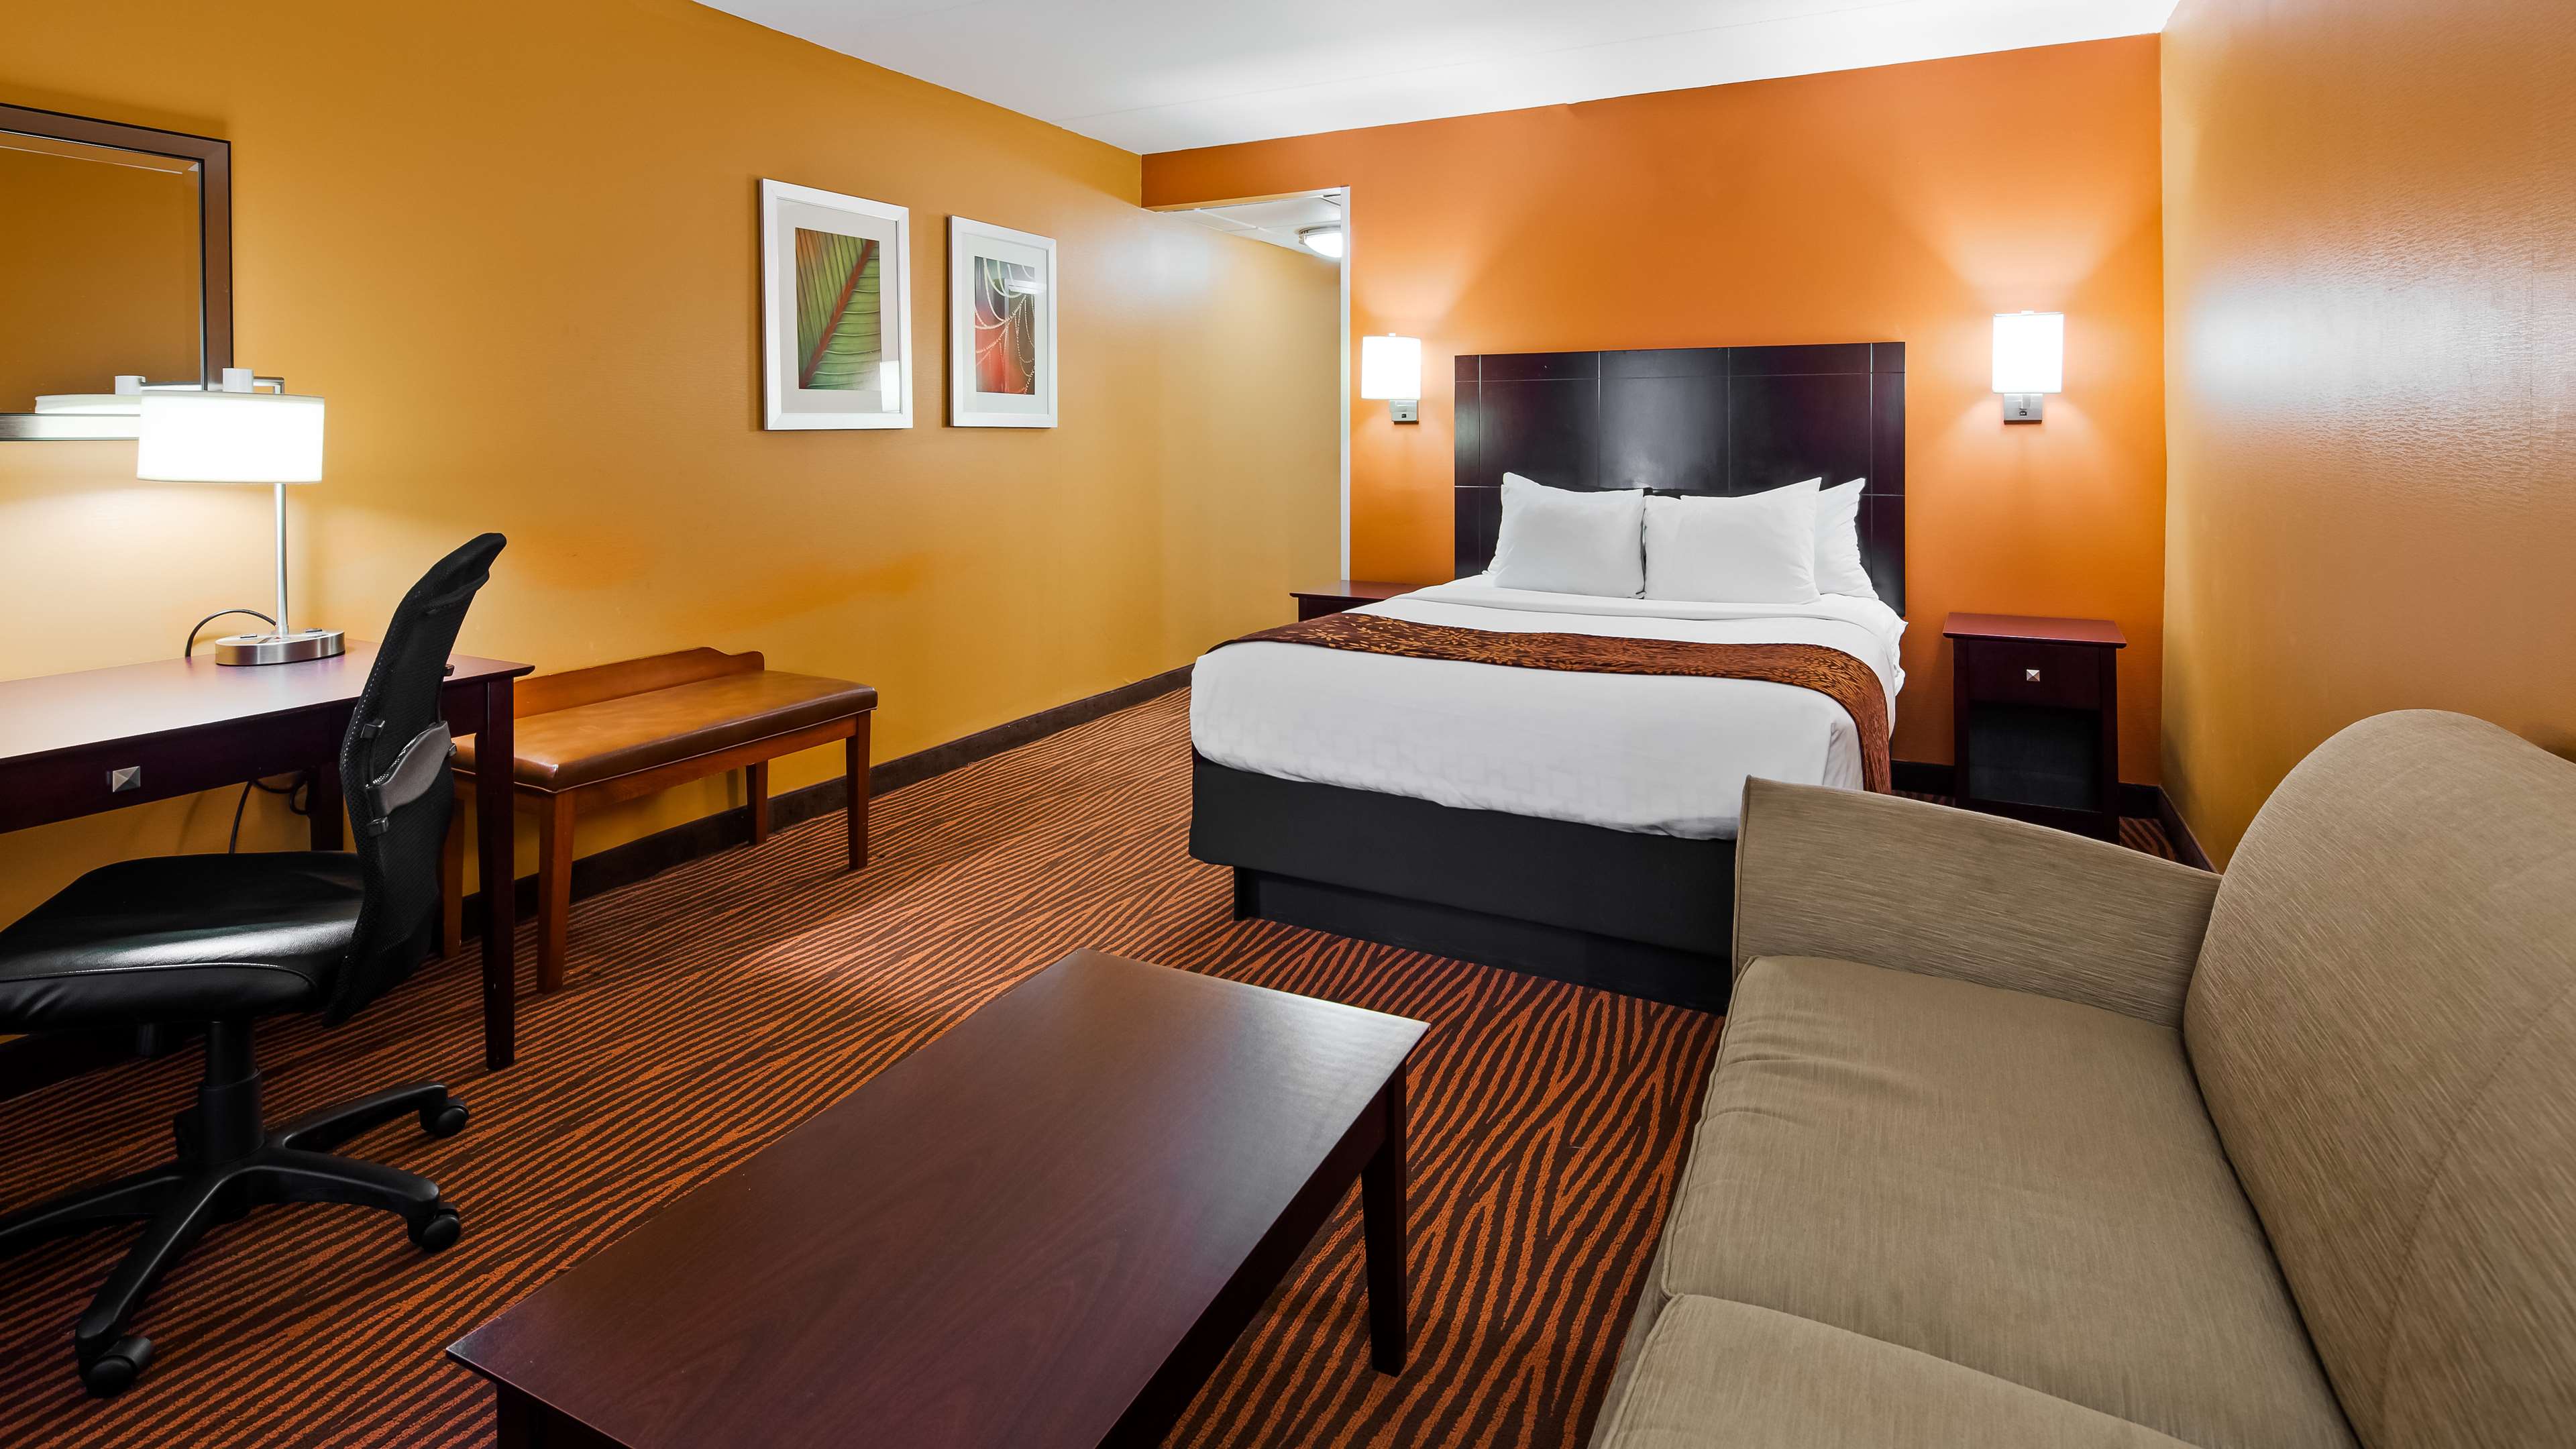 Best Western Executive Hotel of New Haven-West Haven Photo